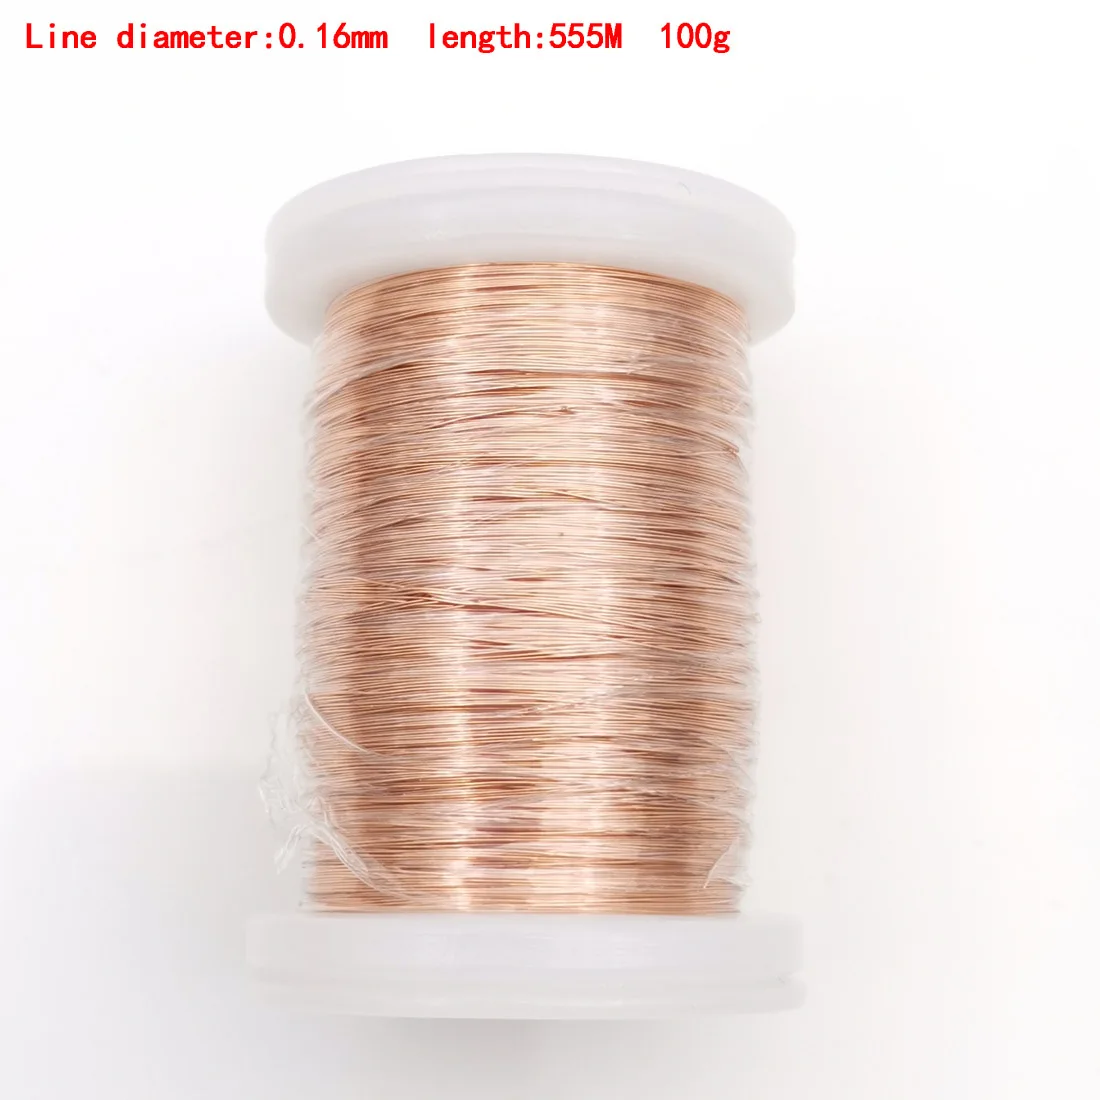 0.1mm 0.16mm 0.25mm 0.4mm 0.8mm 1.3mm copper wire Magnet Wire Enameled Copper Winding wire Weight 100g